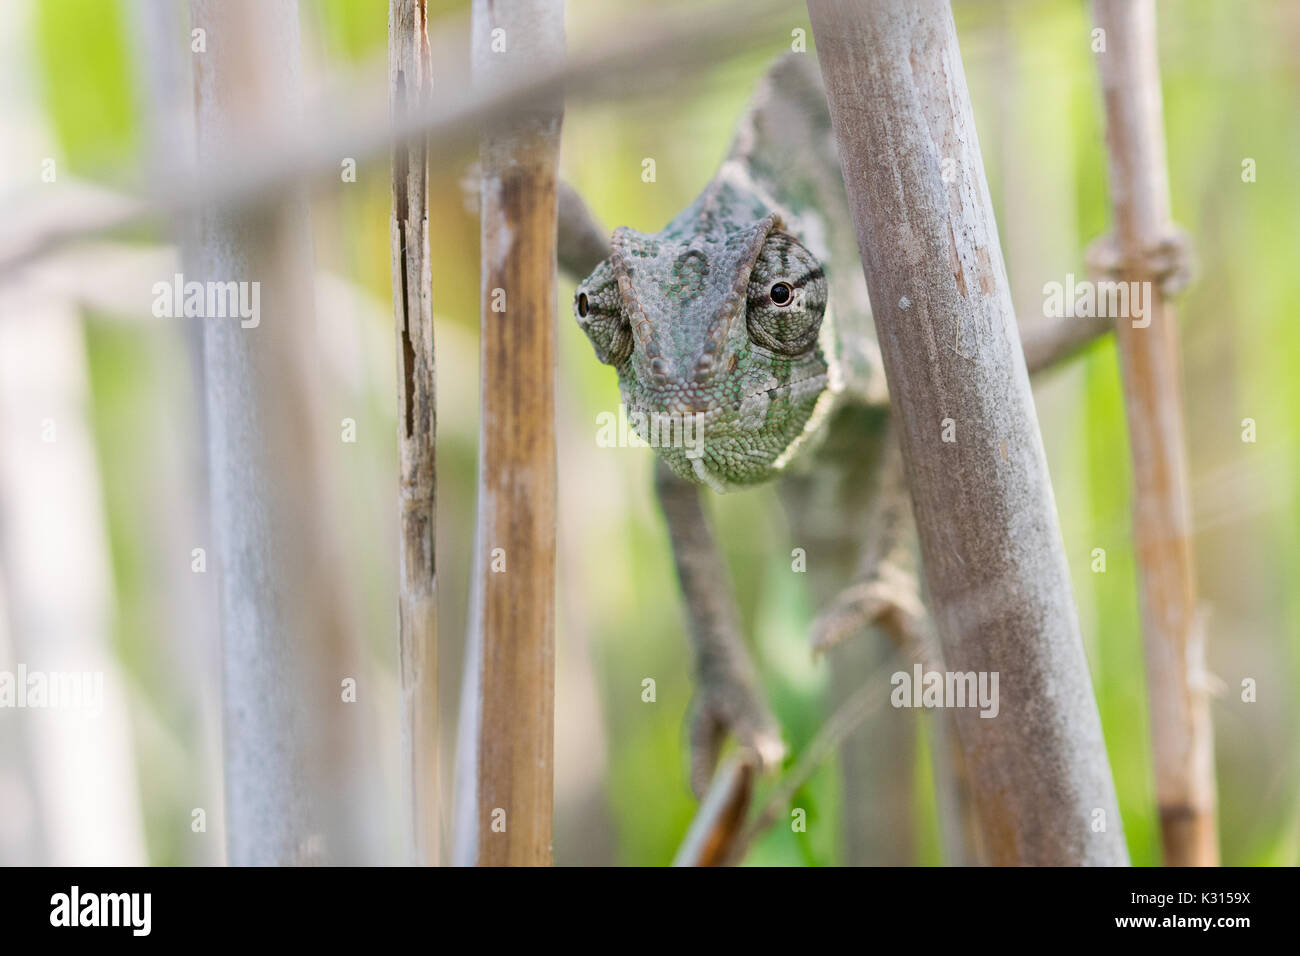 Mediterranean Chameleon, Chamaeleo chameleon stretched out on bamboo sticks, hoping it is not being seen in camouflage, keeping eye contact. Malta Stock Photo